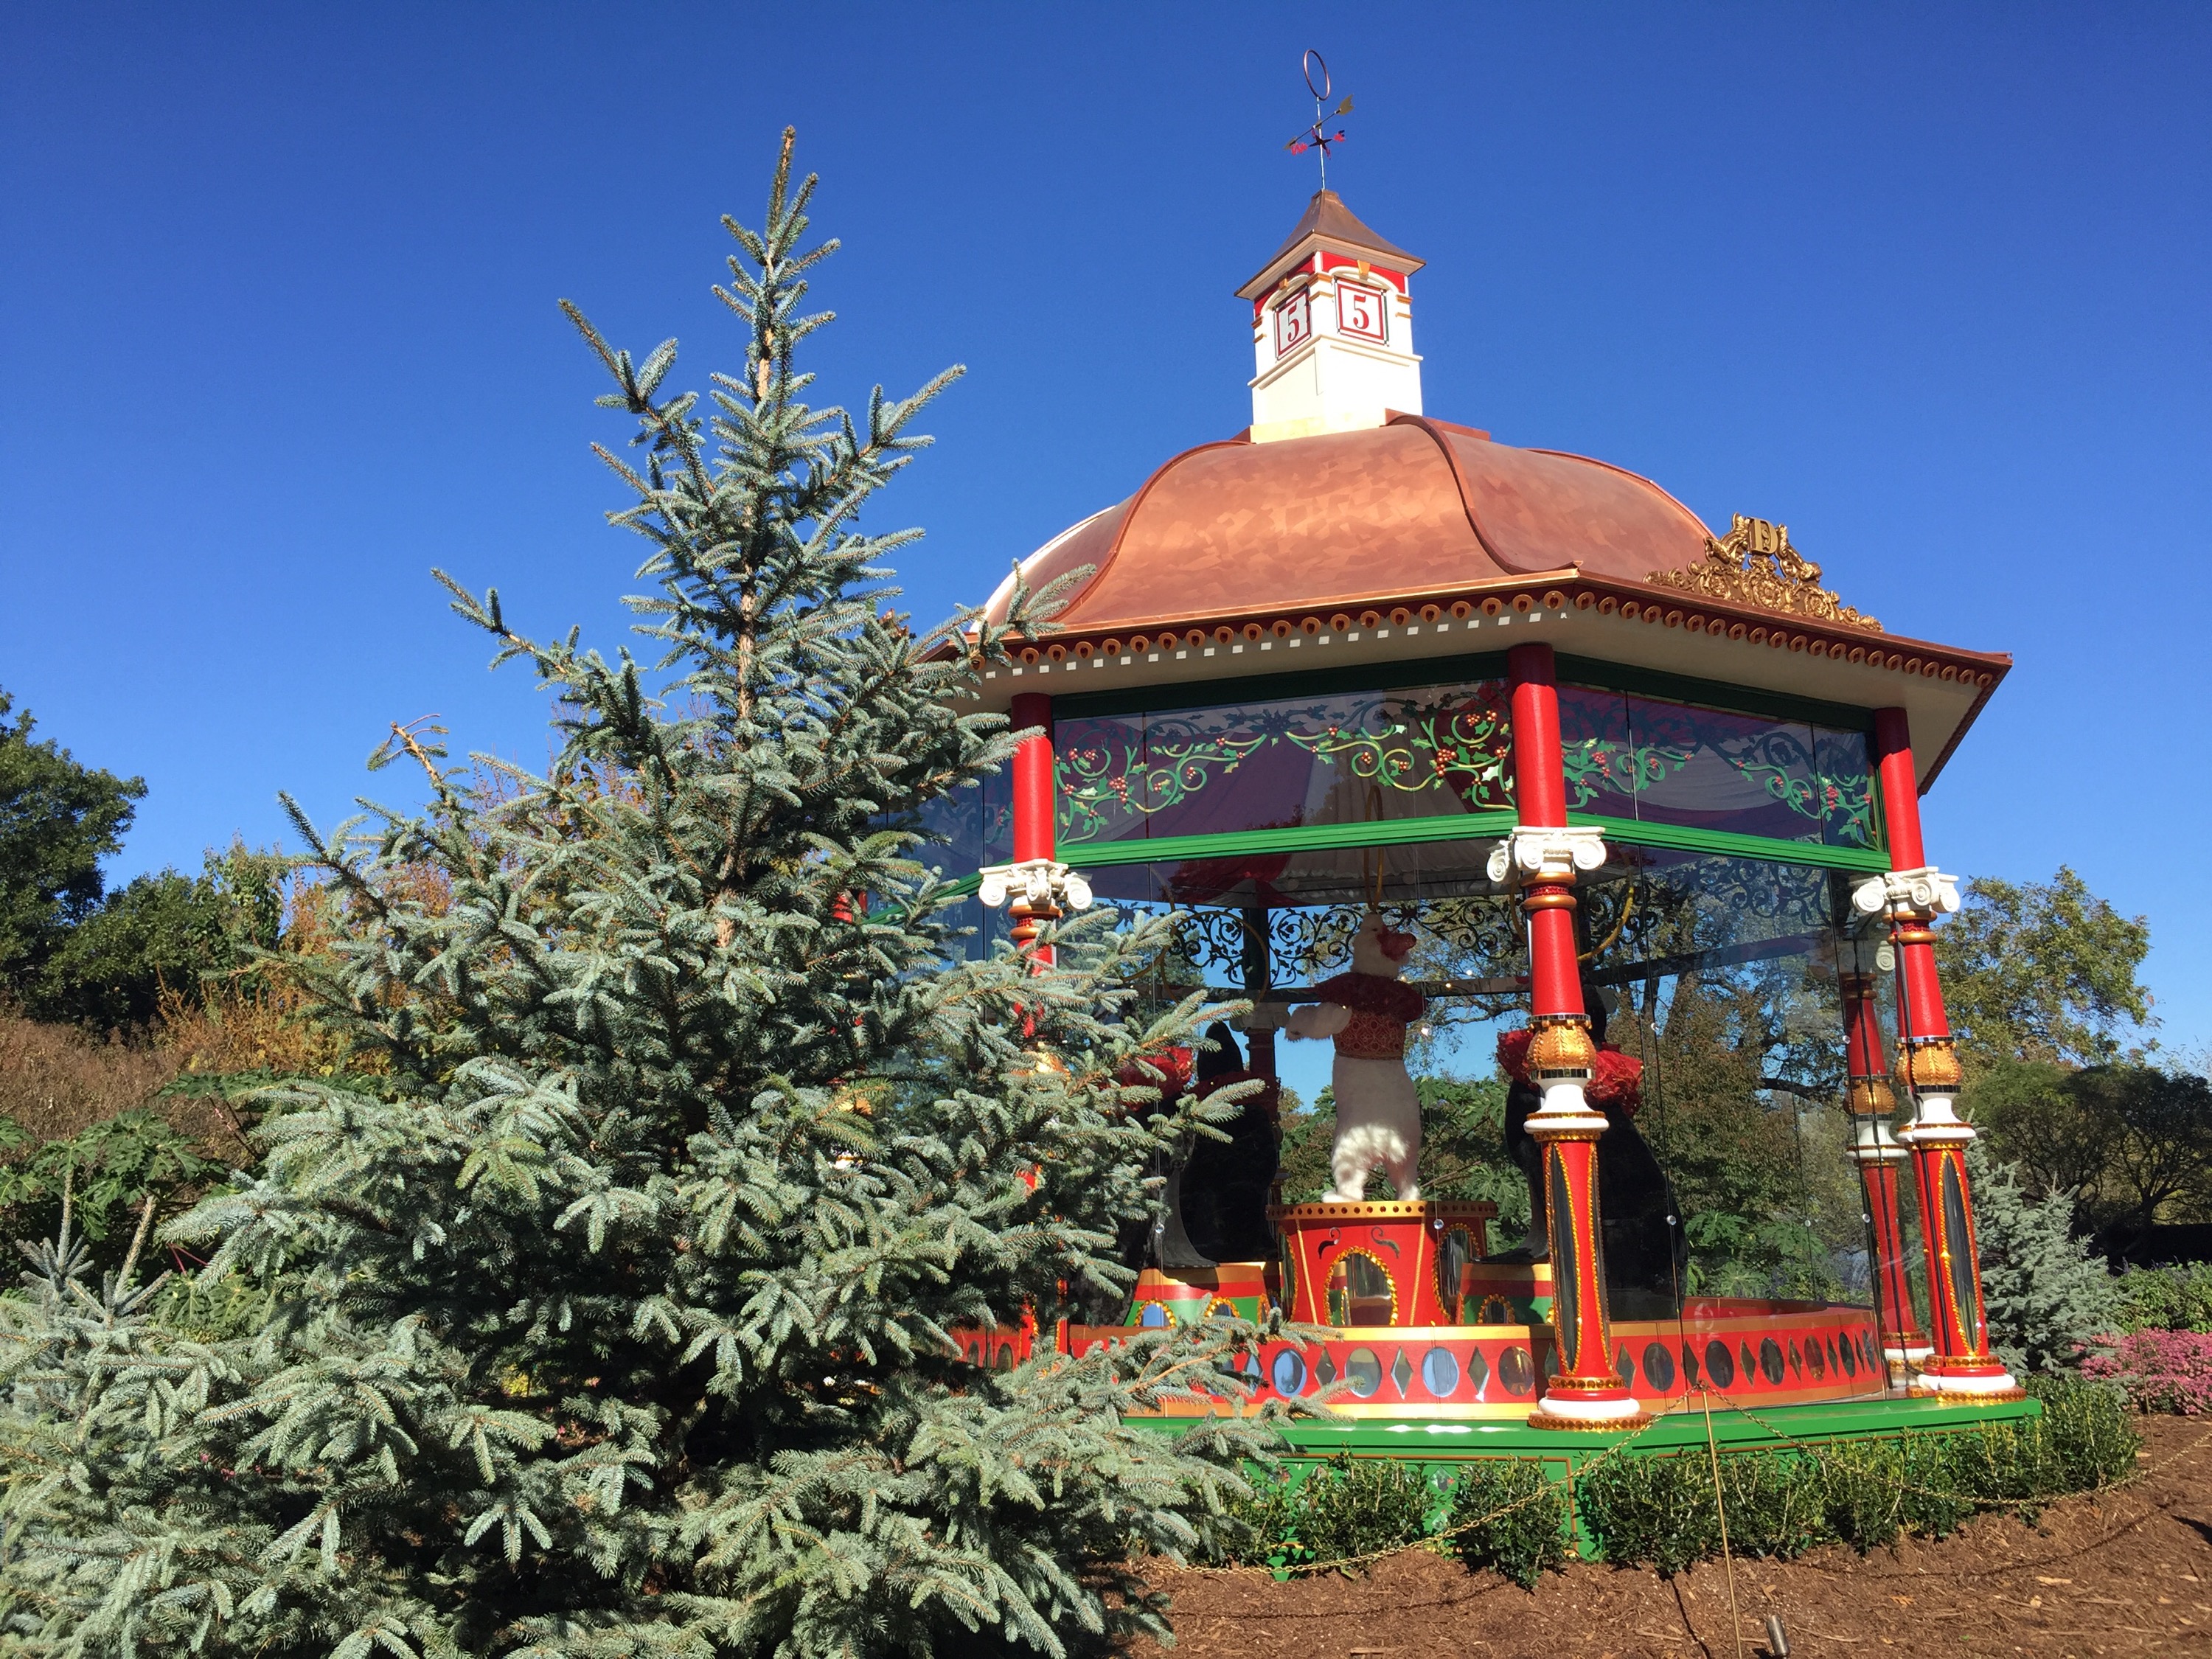 The 12 Days of Christmas at Dallas Arboretum